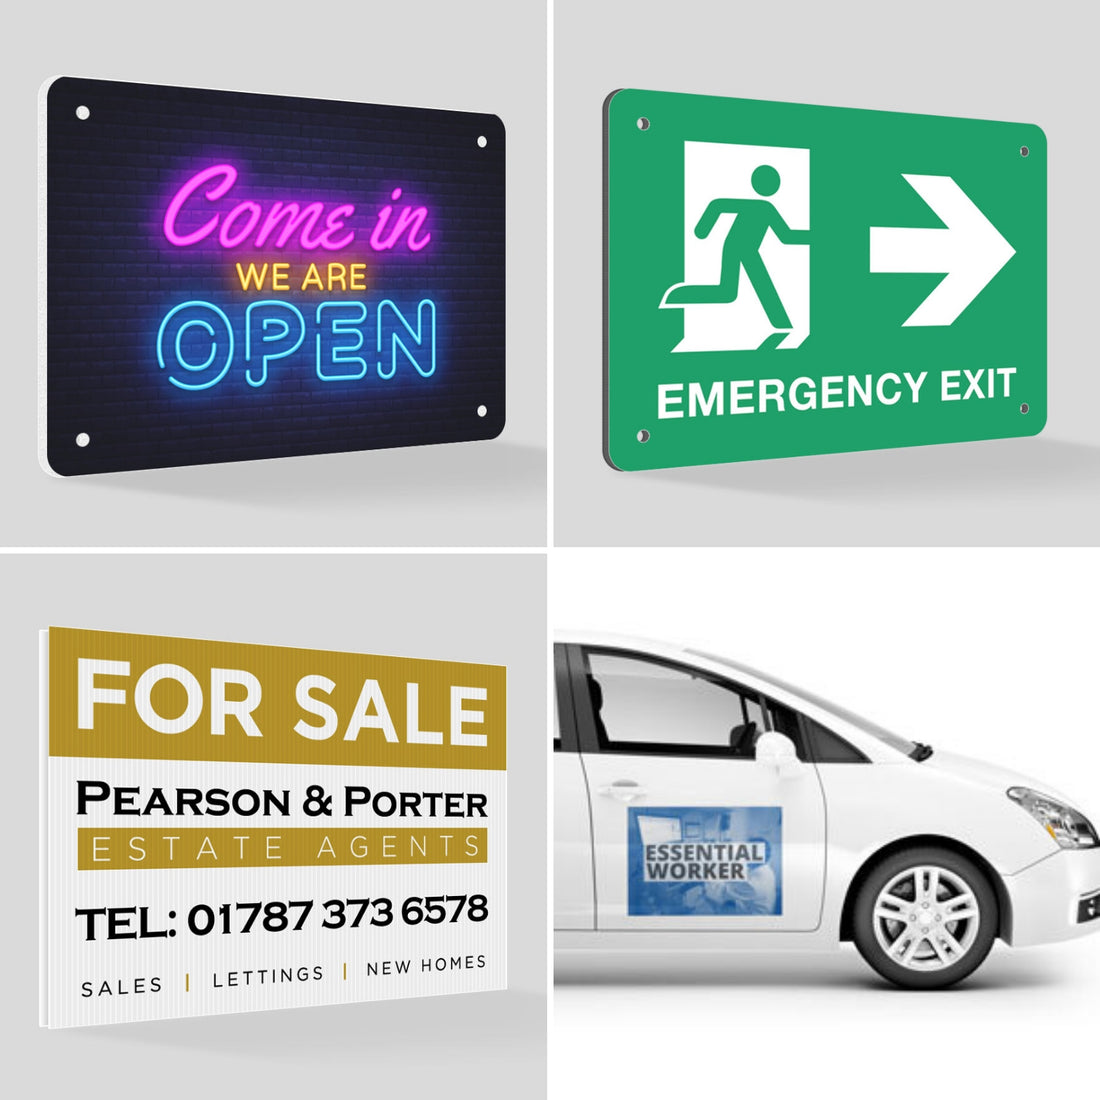 Custom Printed Signs & Display Products | Order Now | MD Print Shop